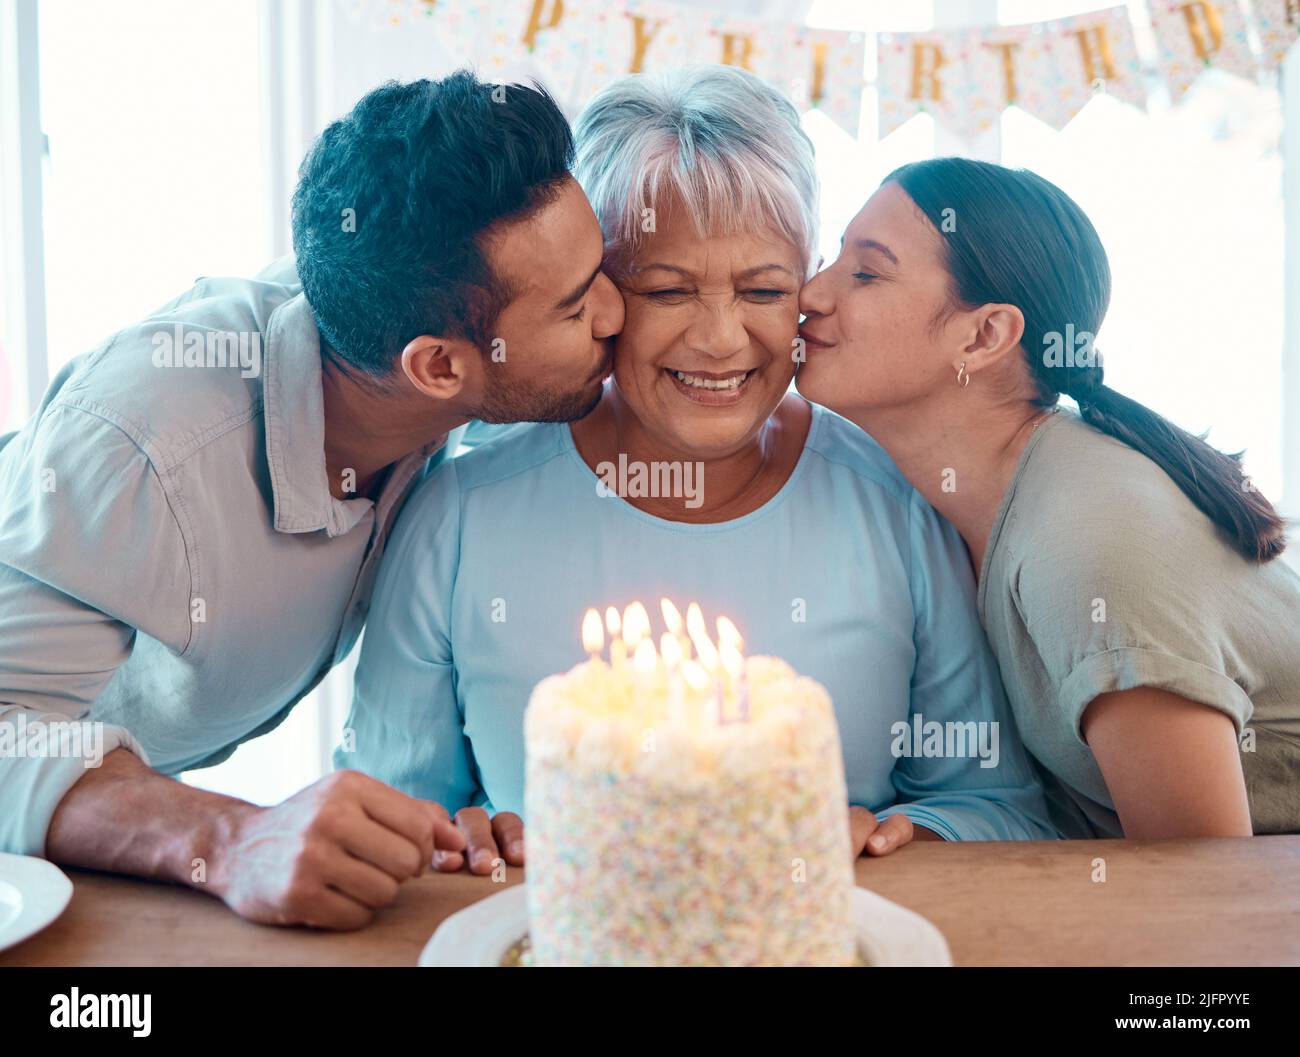 We love you. Shot of two young adults celebrating a birthday with a mature woman at home. Stock Photo